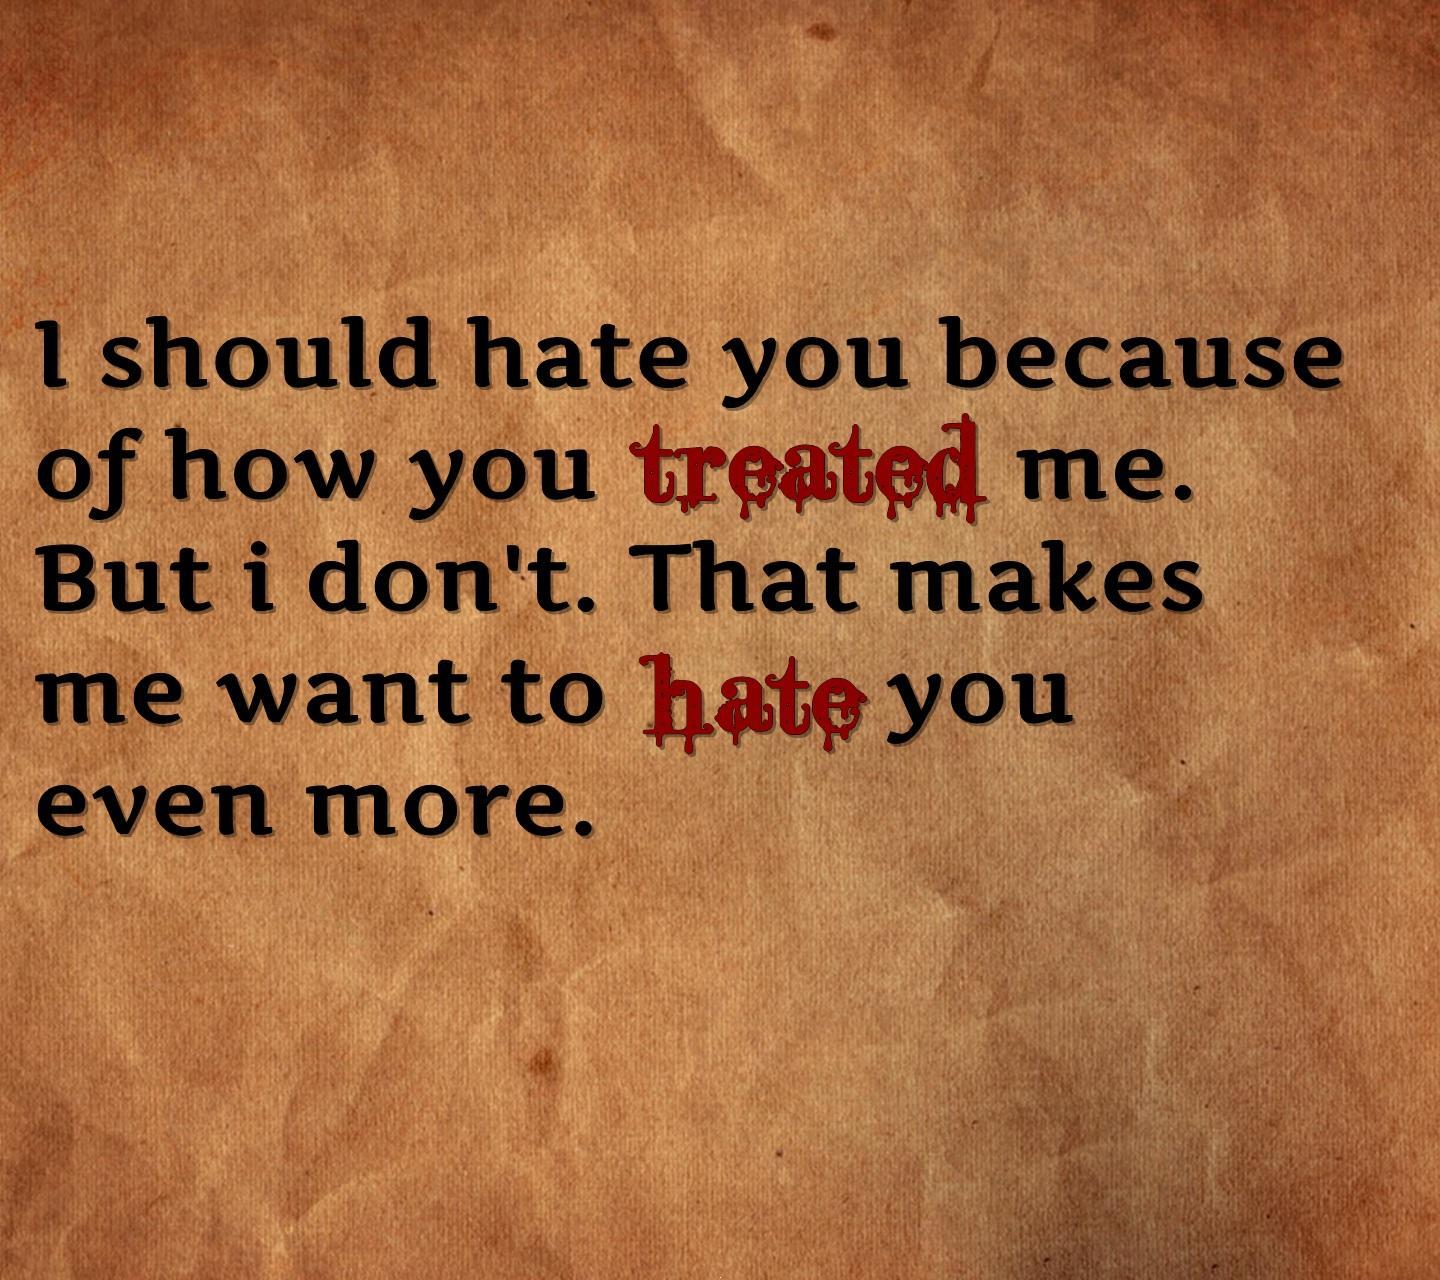 Download Hate You Hd Wallpaper For Laptop Wallpaper - Background I Hate You , HD Wallpaper & Backgrounds